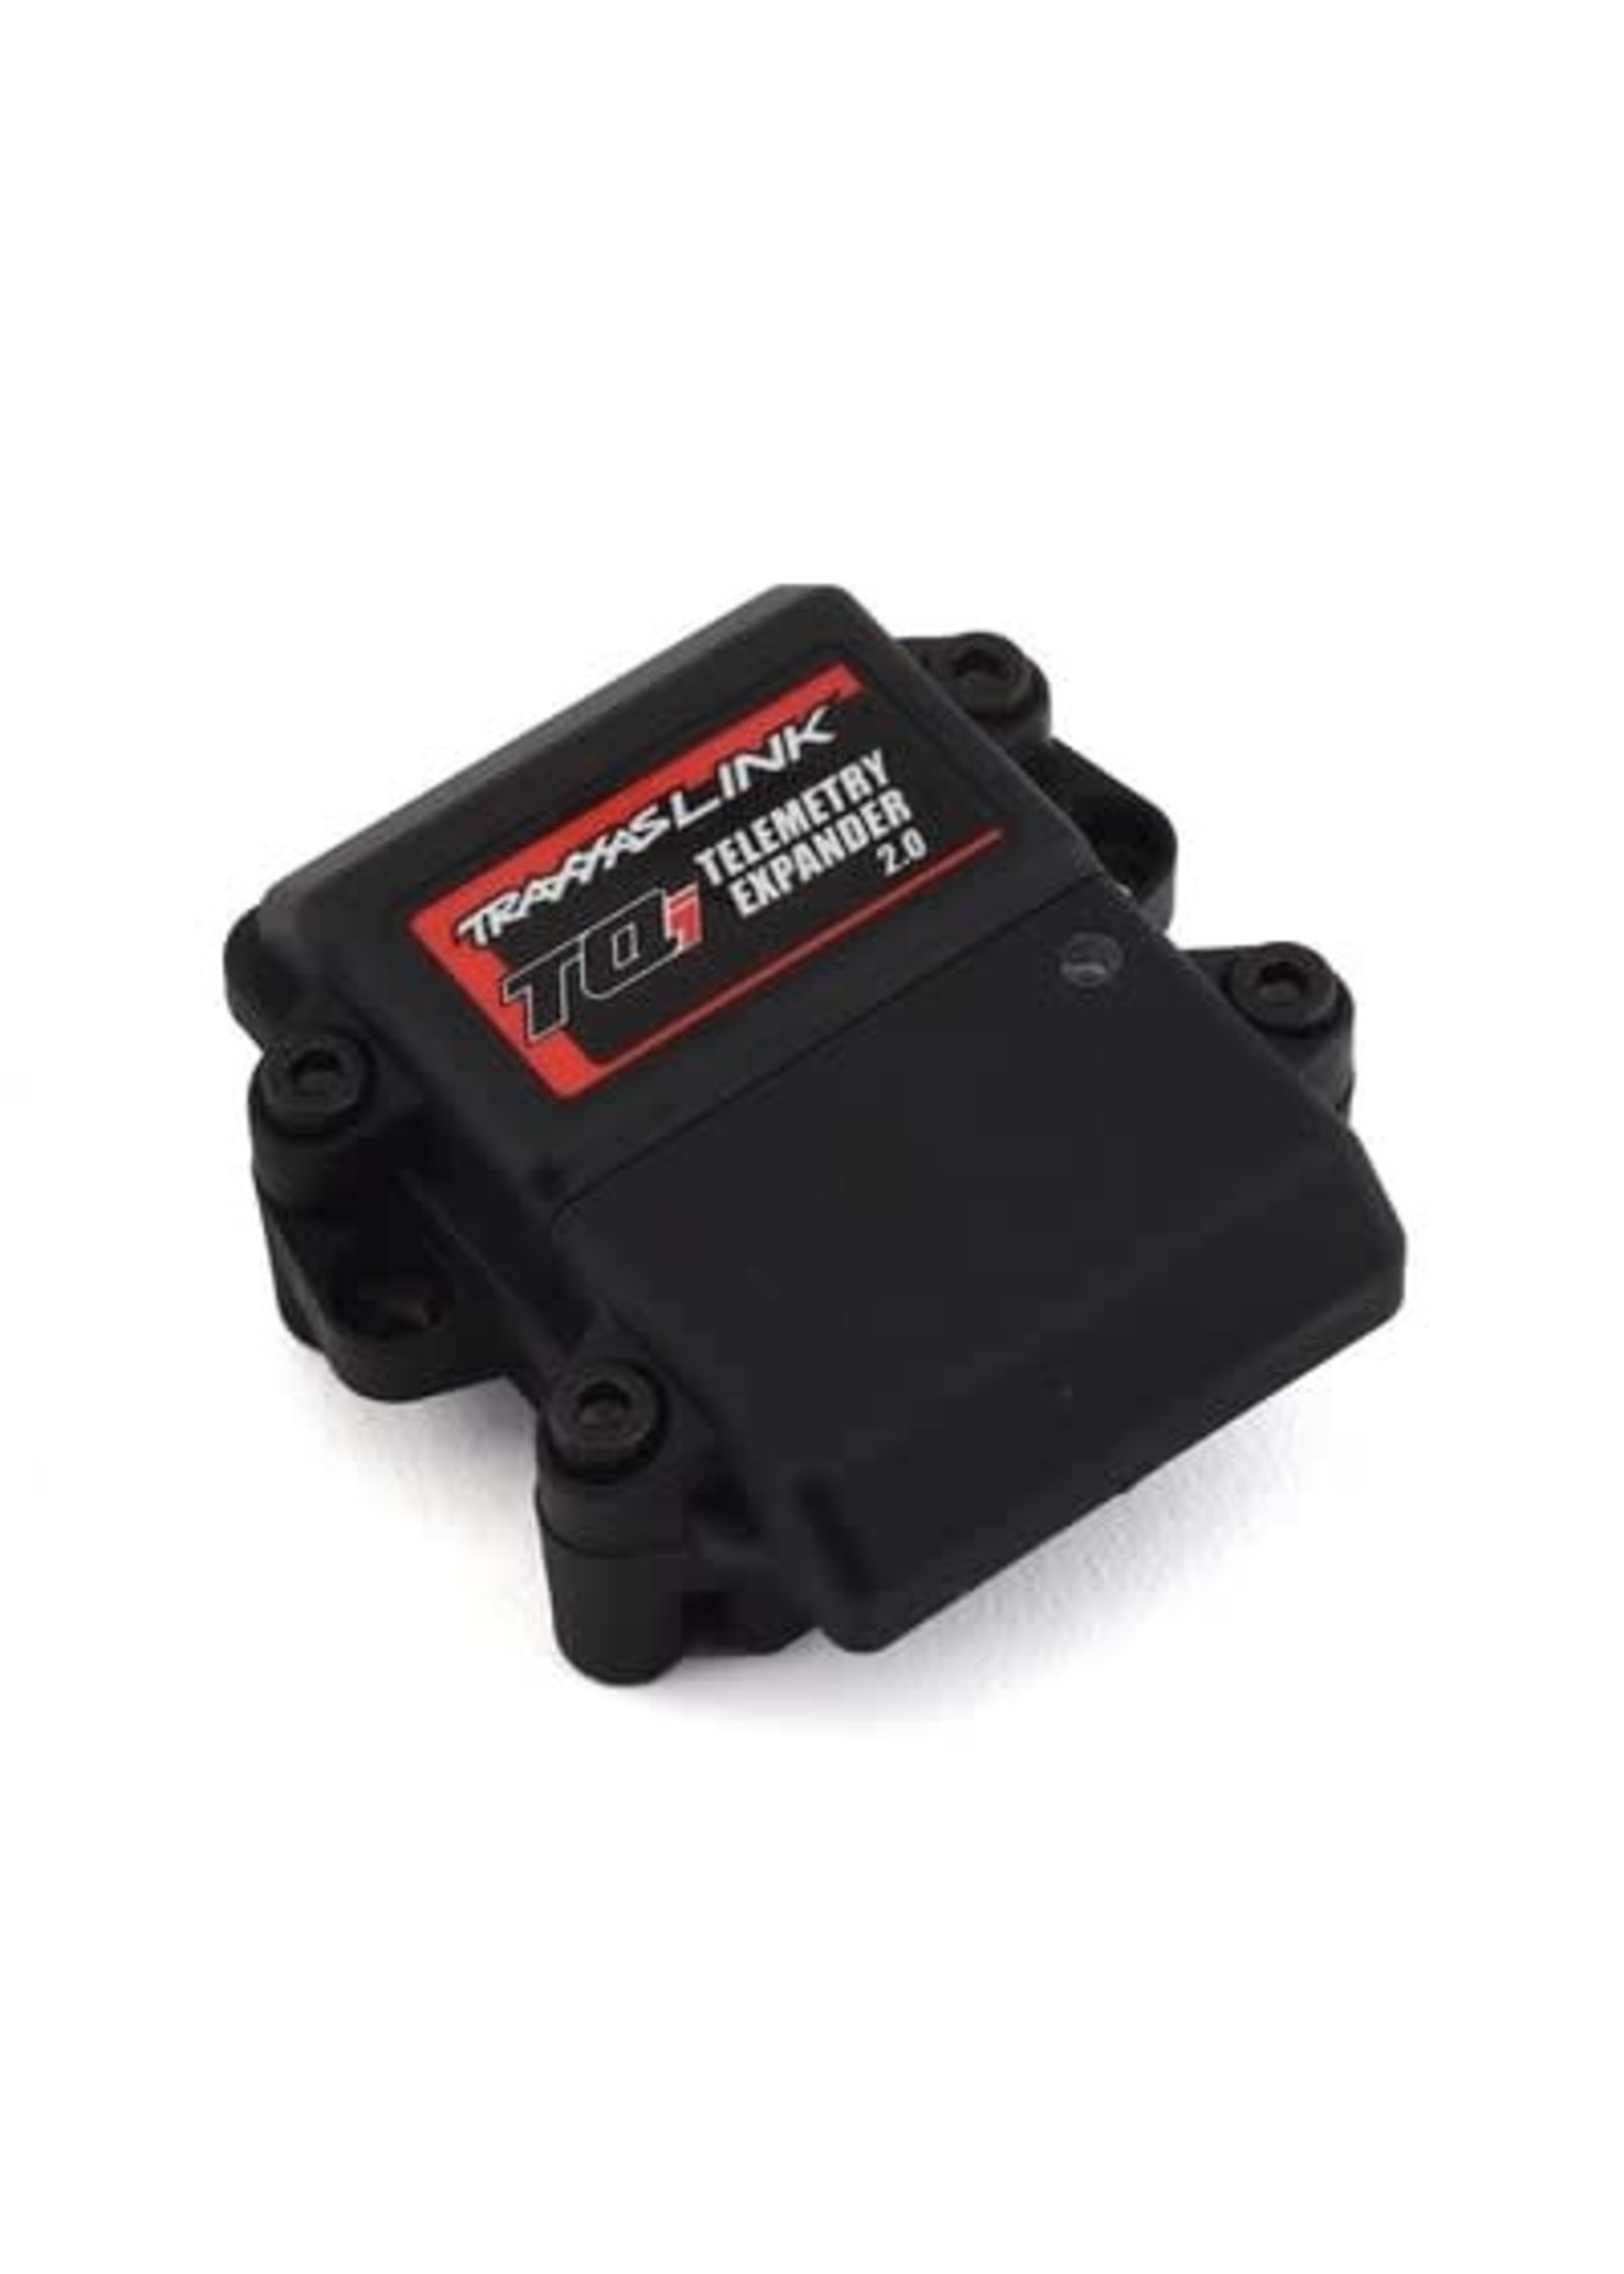 Traxxas 6553X Telemetry expander 2.0 and GPS module 2.0, TQi radio system